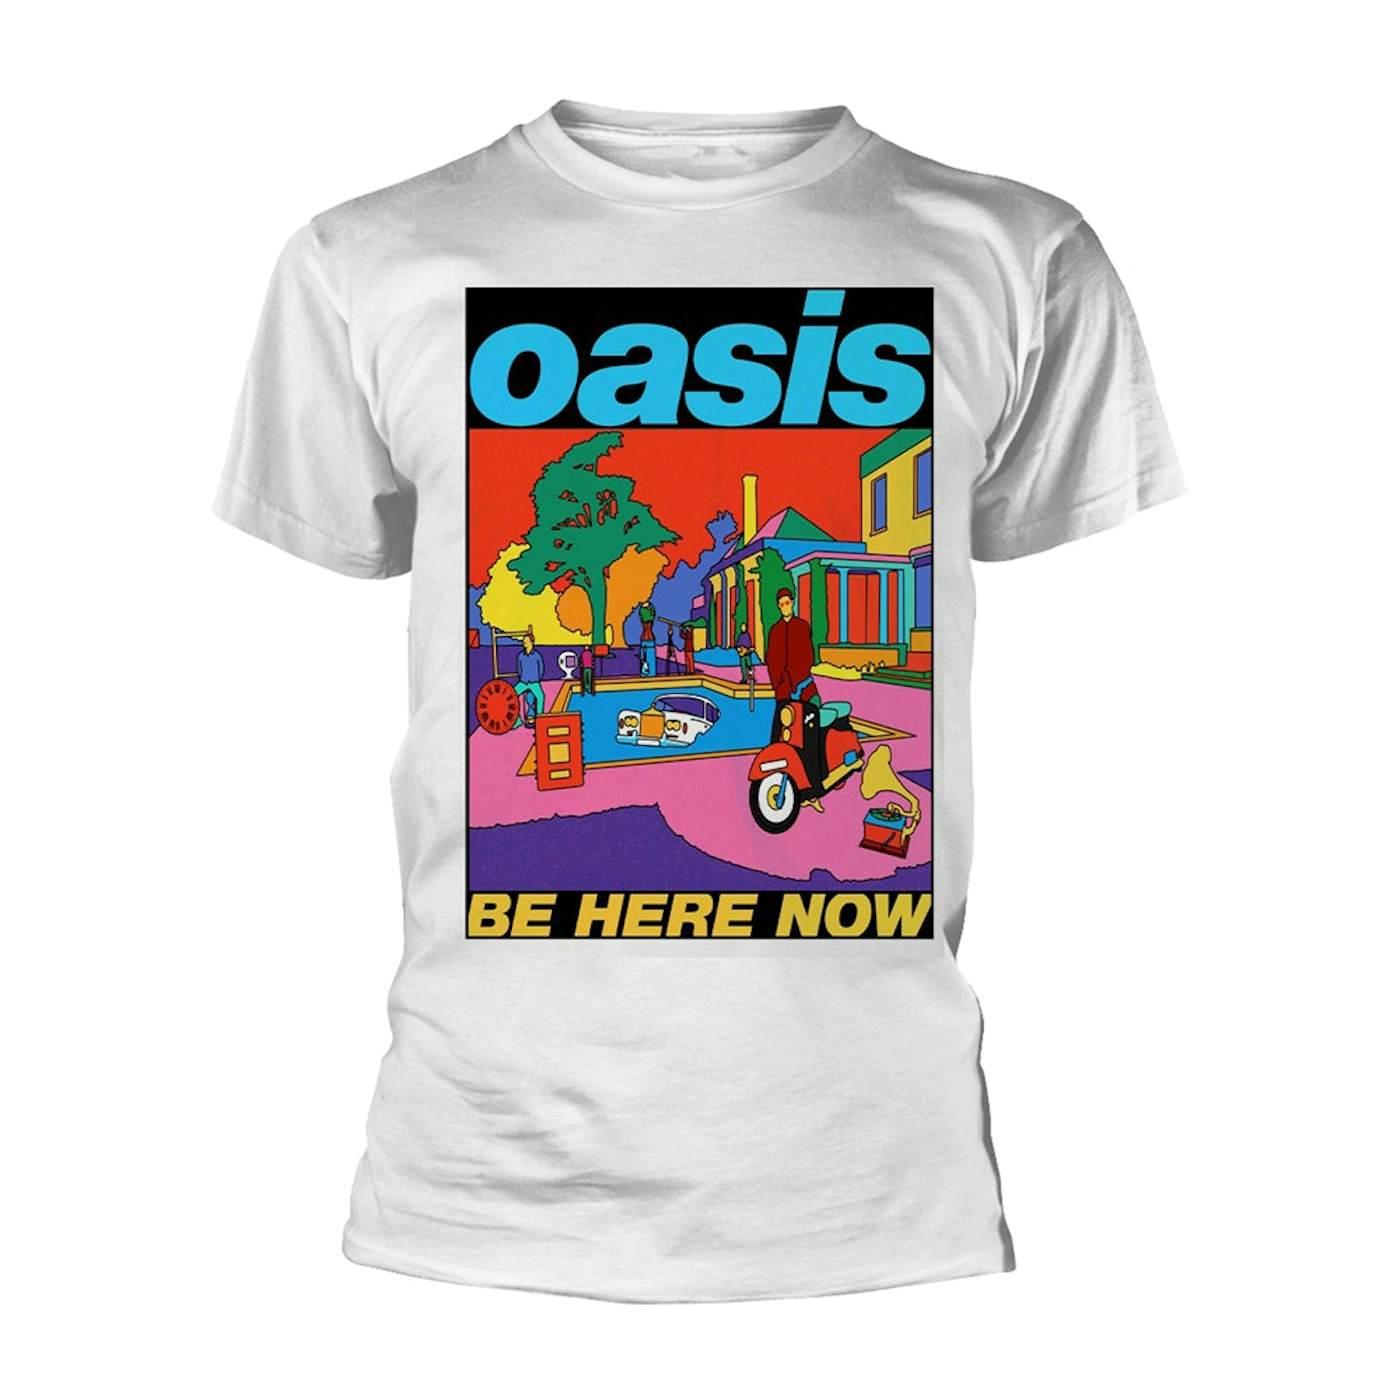 Oasis T Shirt - Be Here Now